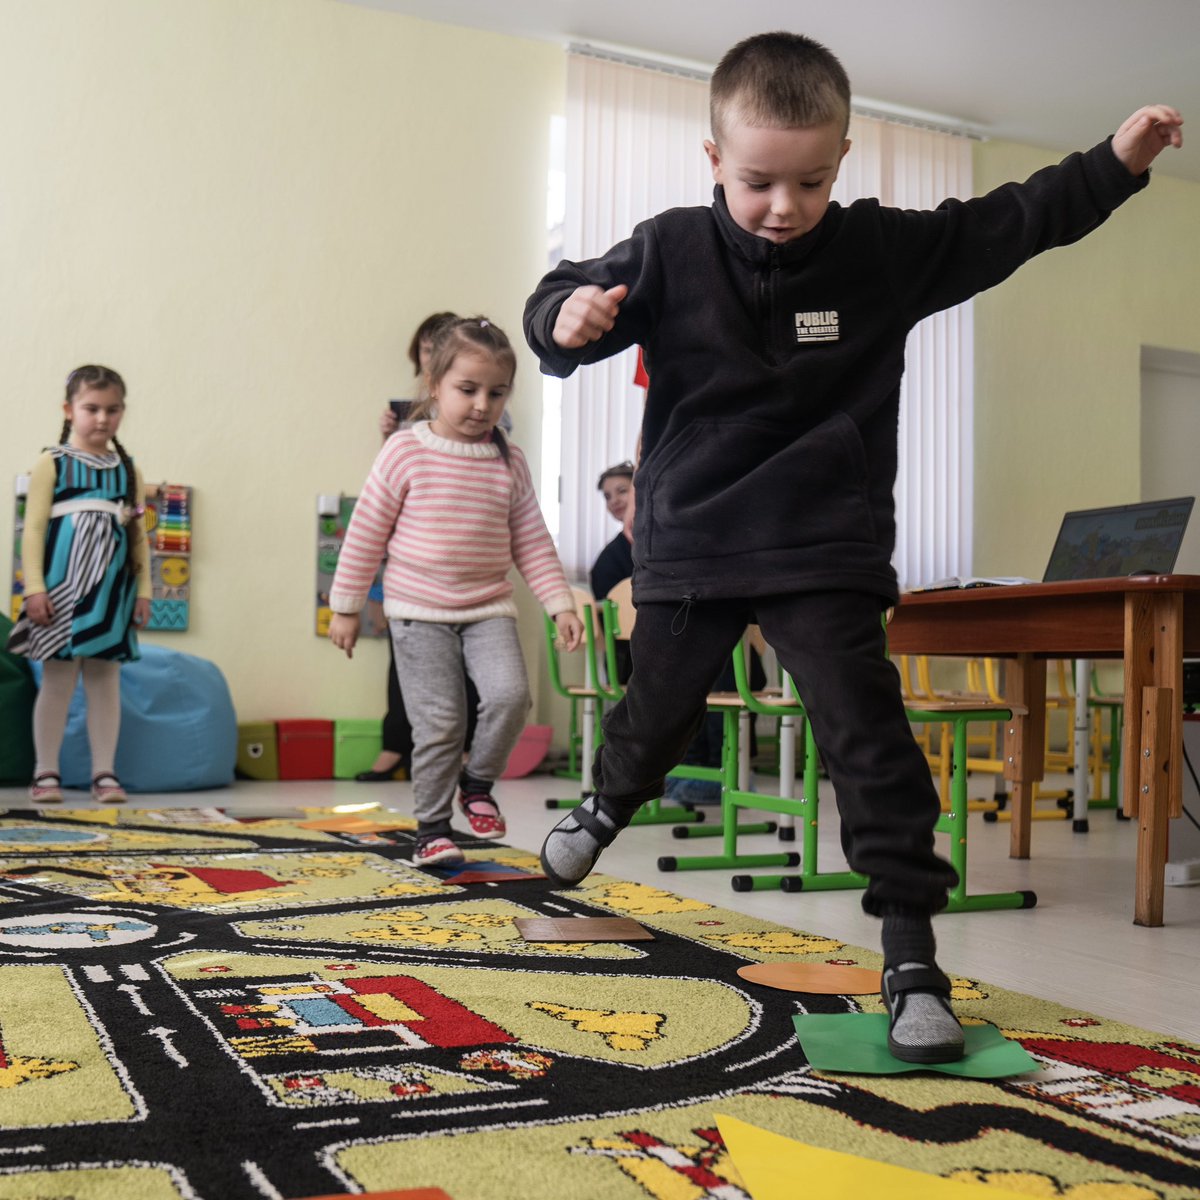 Study, but make it fun! That is how Zirochka (Little Star) kindergarten students in Ivano-Frankivsk, #Ukraine, learn geometric shapes. With our support, 150 students have better facilities, tech equipment, and psychosocial programs. Every child deserves a peaceful childhood! 🫂